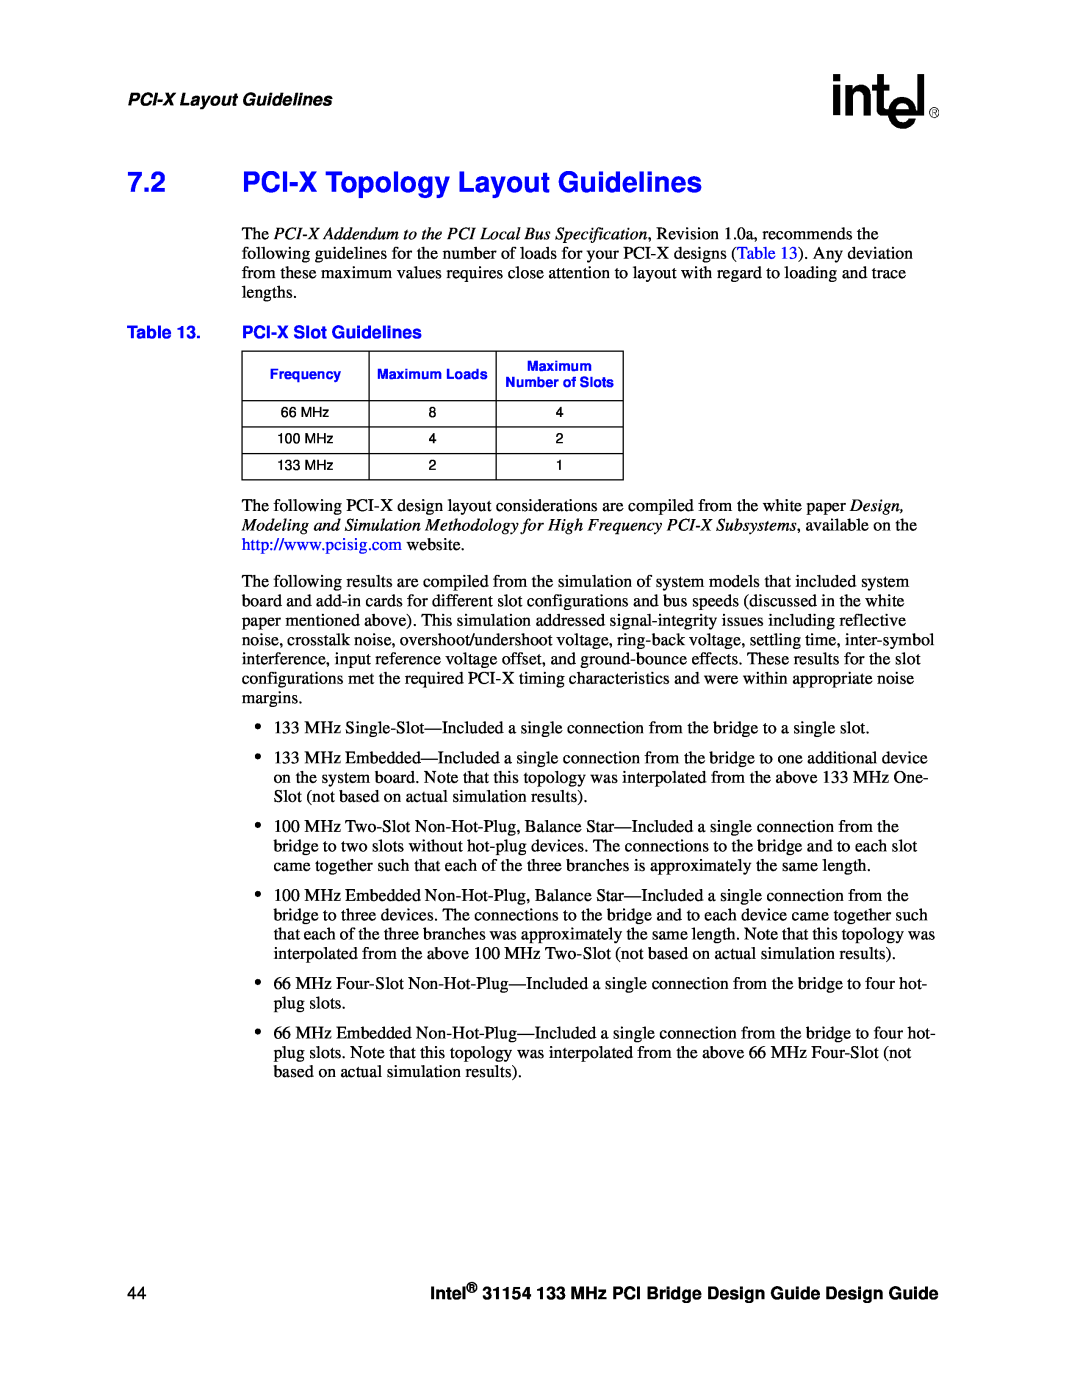 Intel 31154 manual PCI-X Topology Layout Guidelines, PCI-X Slot Guidelines, PCI-X Layout Guidelines 